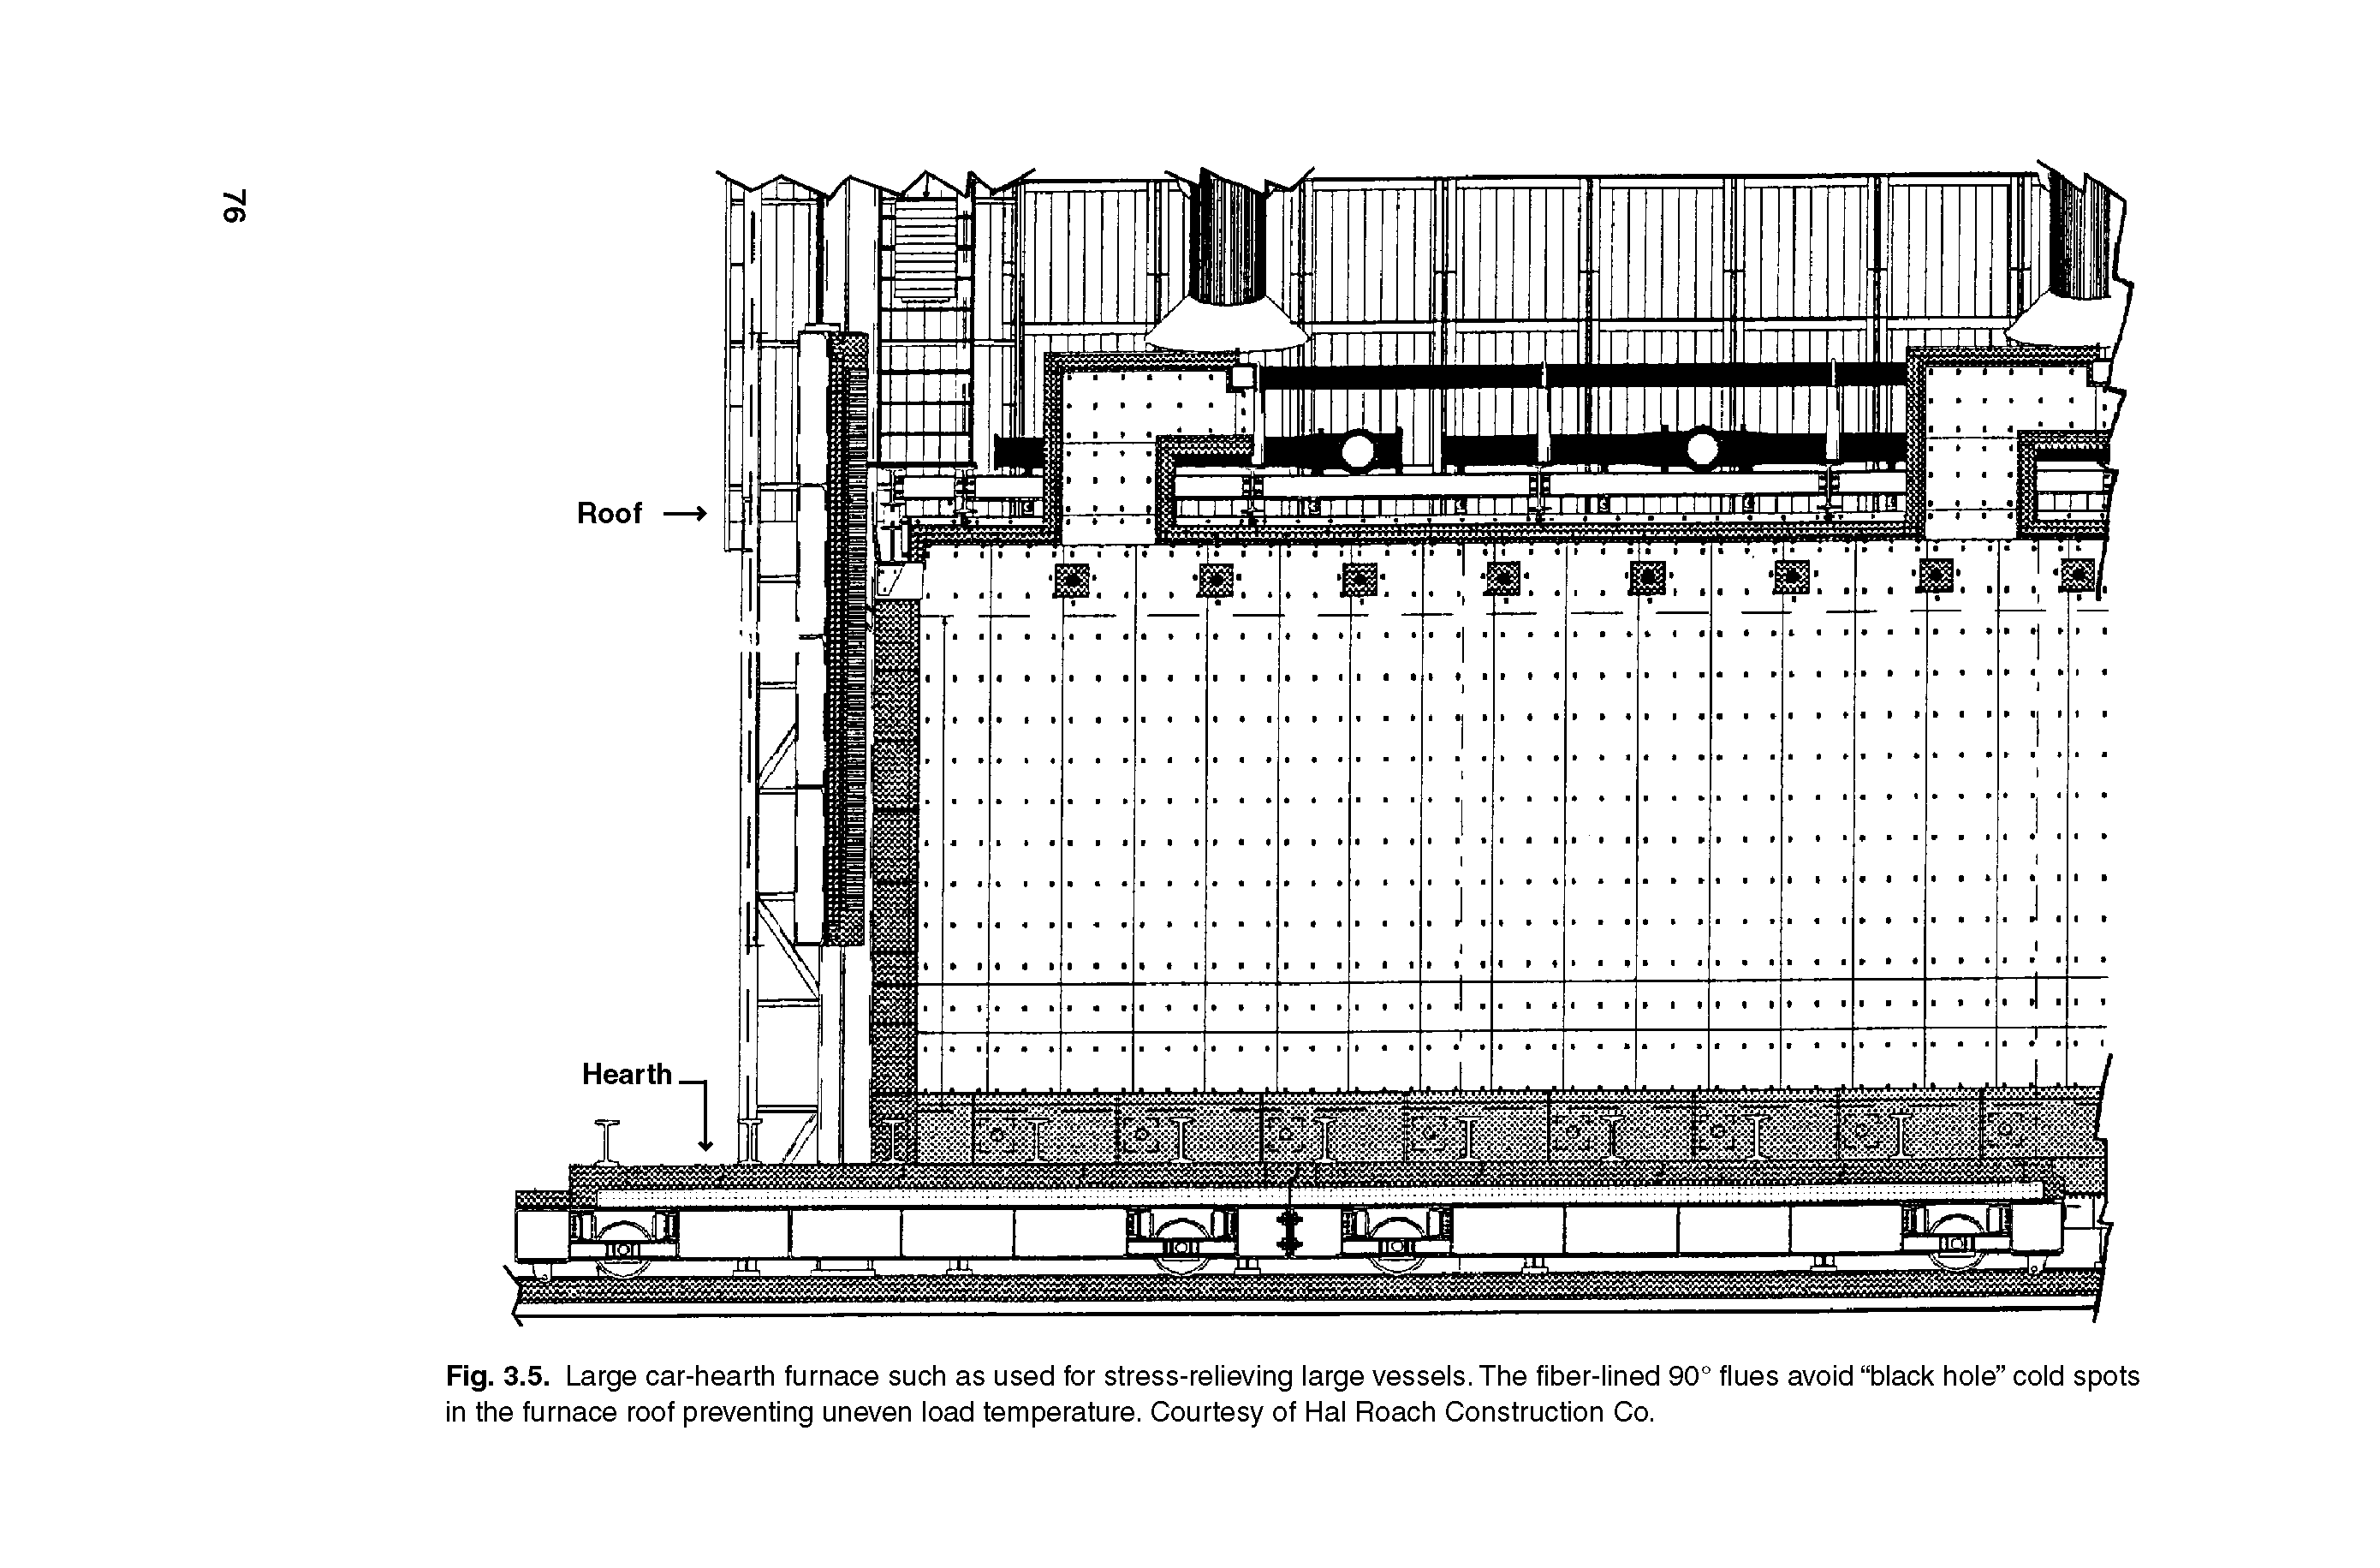 Fig. 3.5. Large car-hearth furnace such as used for stress-relieving large vessels. The fiber-lined 90° flues avoid black hole cold spots in the furnace roof preventing uneven load temperature. Courtesy of Hal Roach Construction Co.